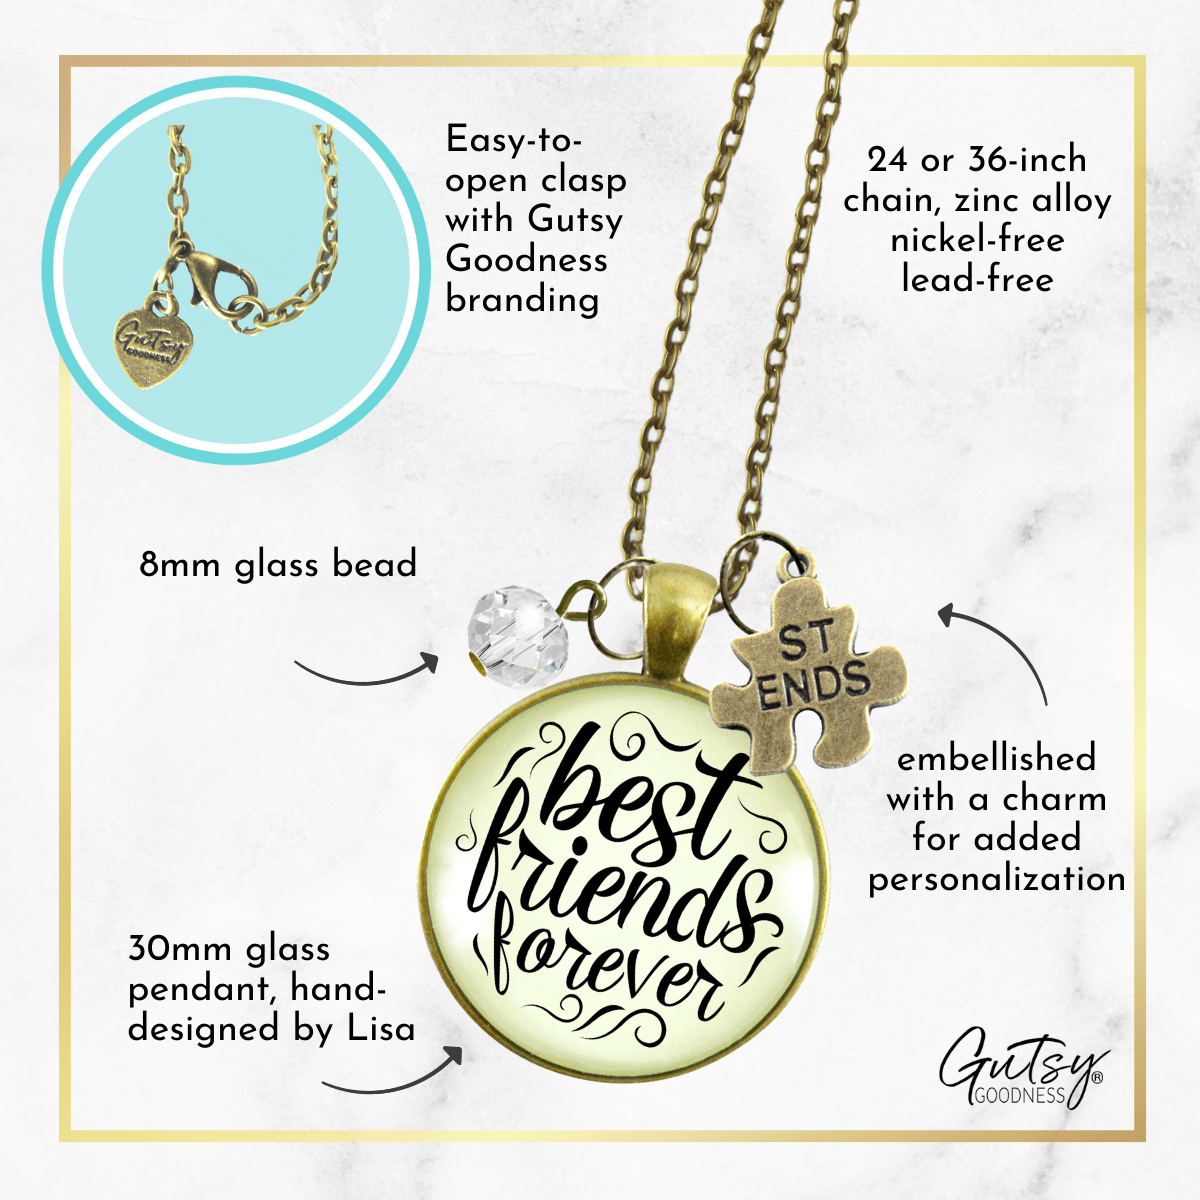 Best Friends Forever Necklaces Set of 2 Bff Quote Jewelry Charm - Gutsy Goodness